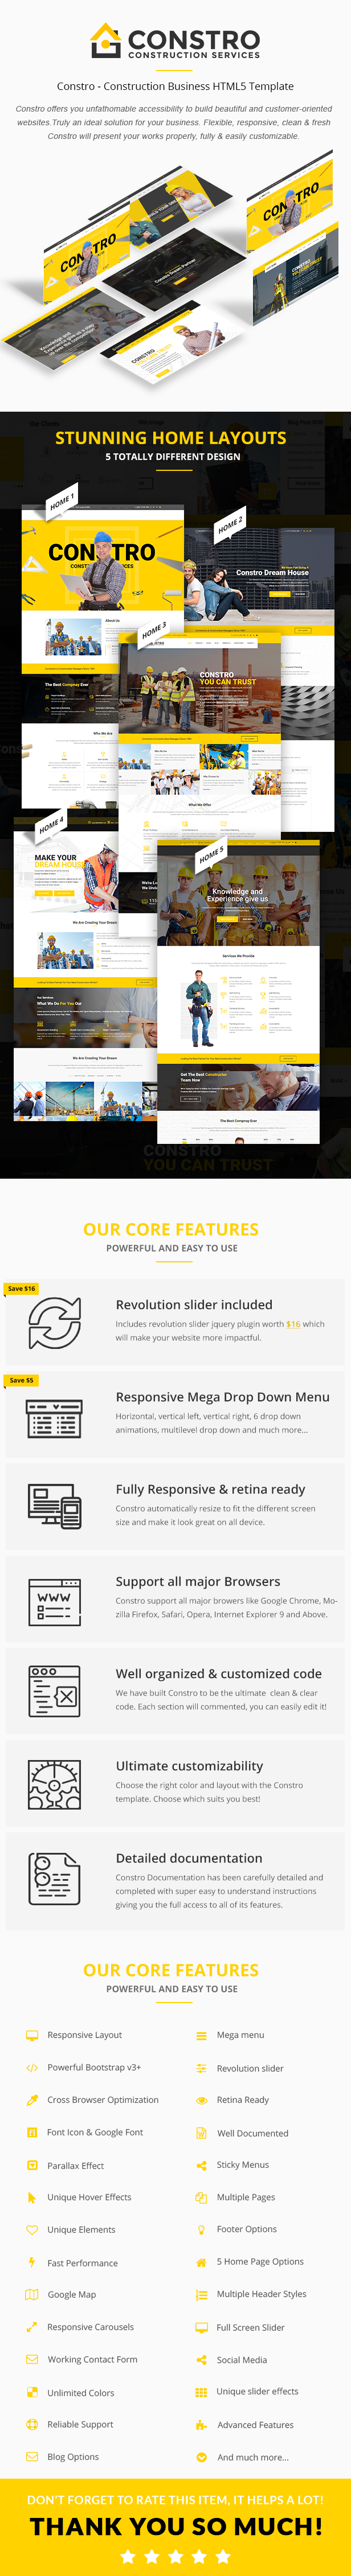 Constro - Construction Business HTML5 Template - 2